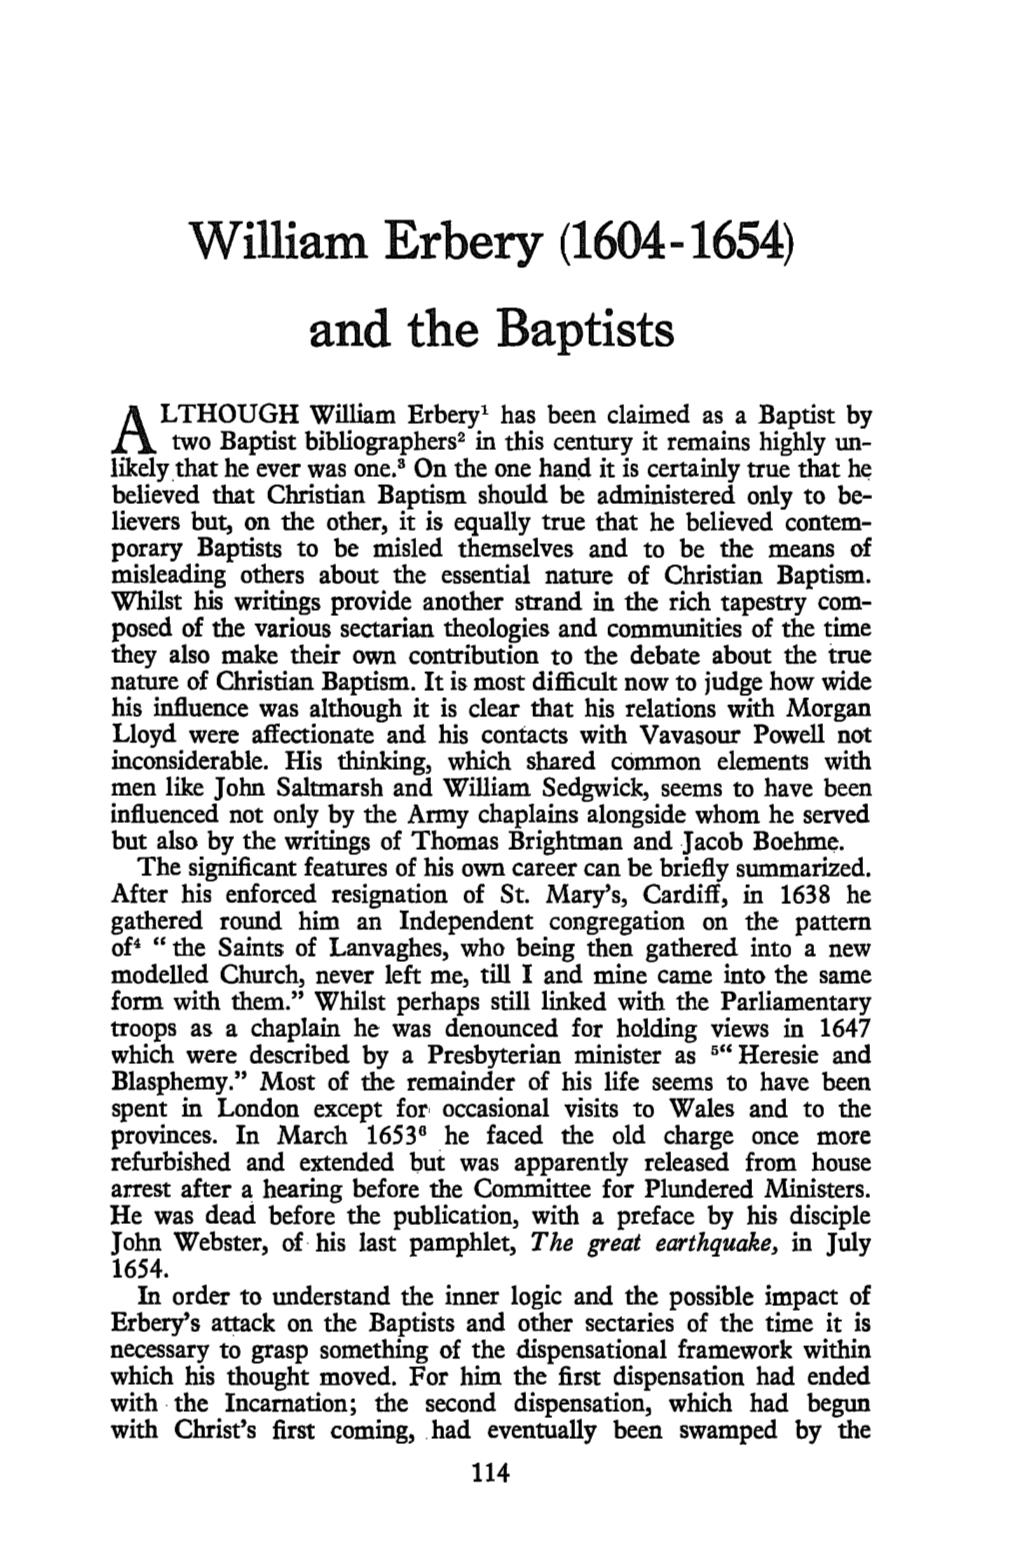 William Erbery (1604-1654) and the Baptists